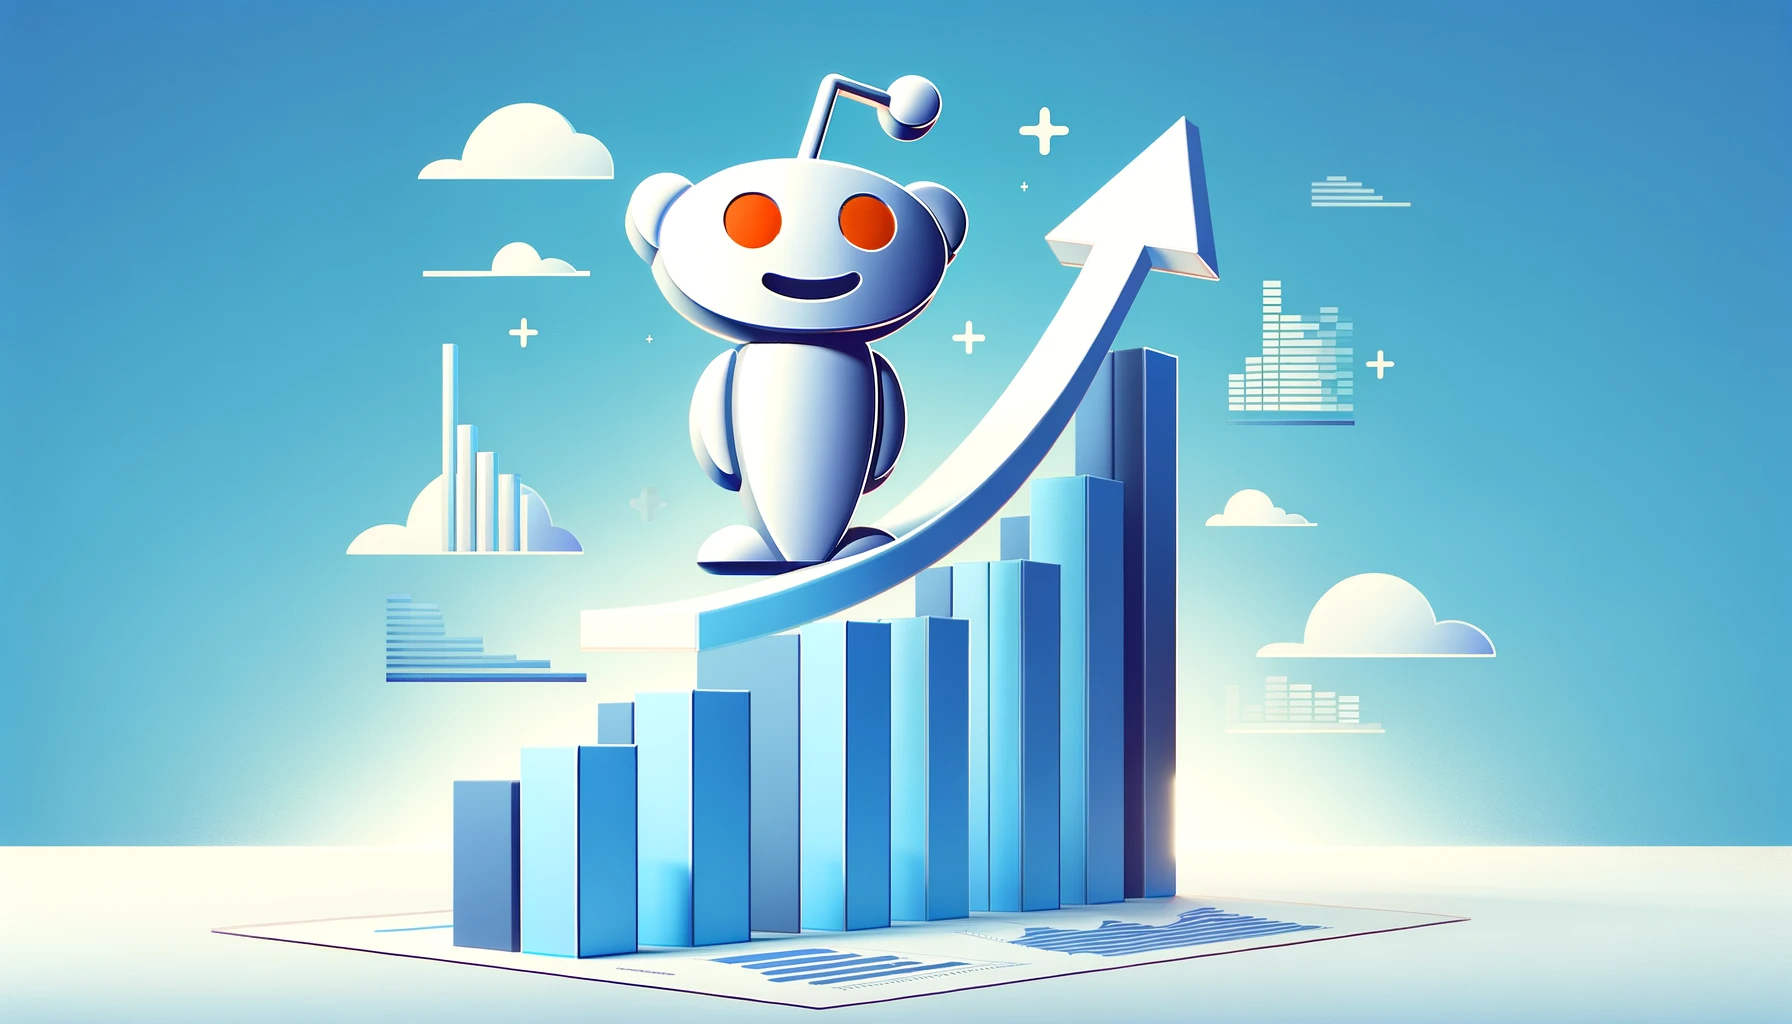 Reddit aims for a valuation nearing $6.5 billion in its forthcoming IPO.